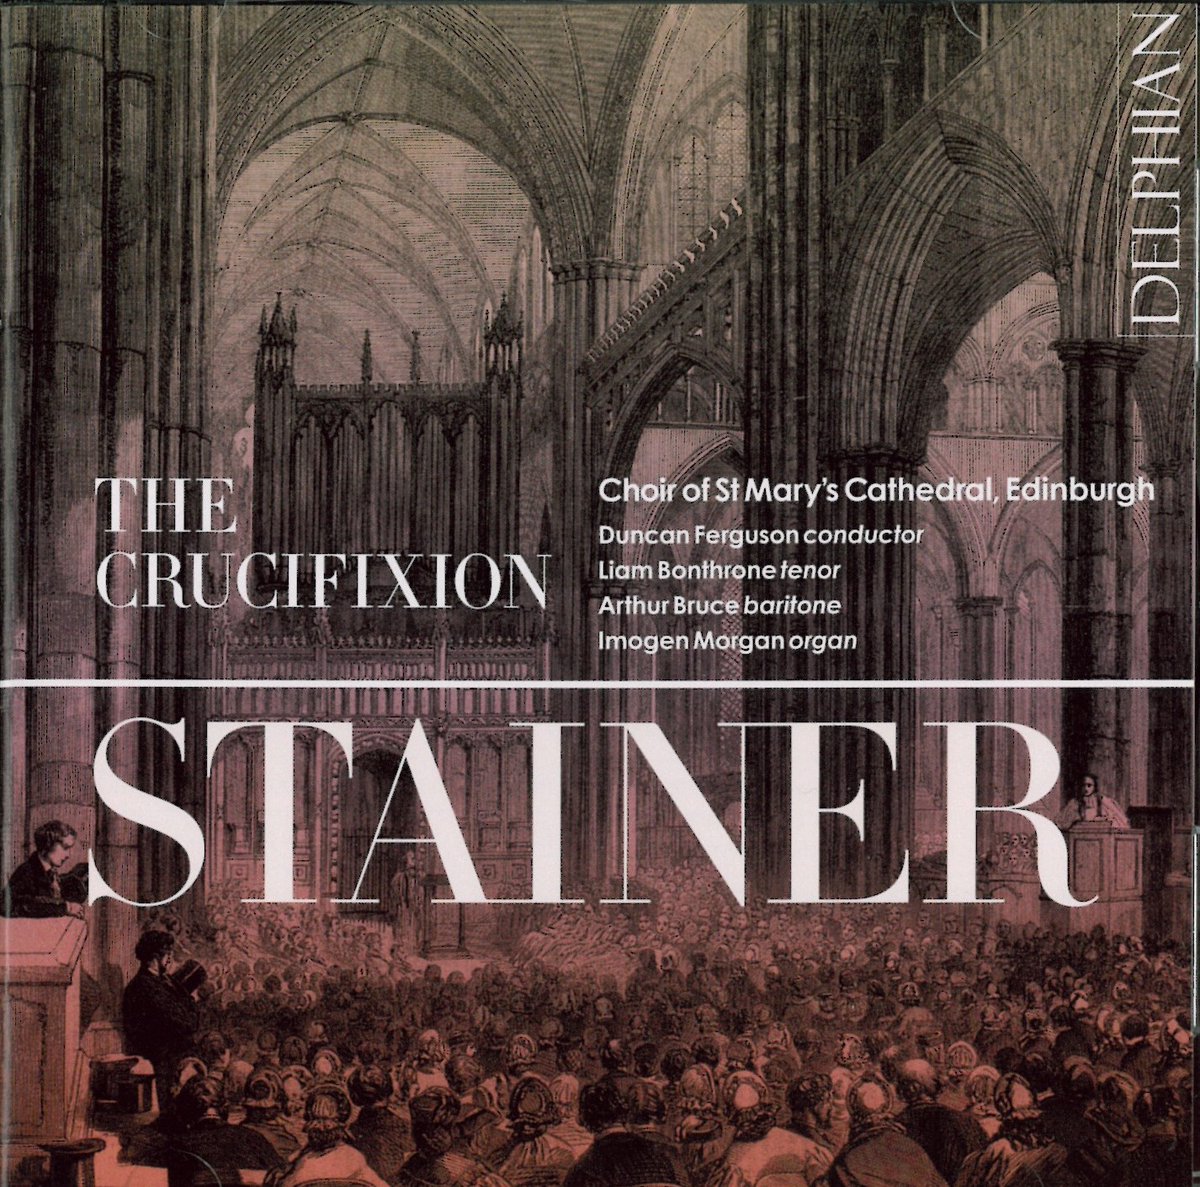 Thanks to all who came to our service this morning! Later today, at 3:30pm, a devotional performance of Stainer's The Crucifixion - now available on the choir's recent recording with Delphian Records. cathedral.net/whats-on/holyw…